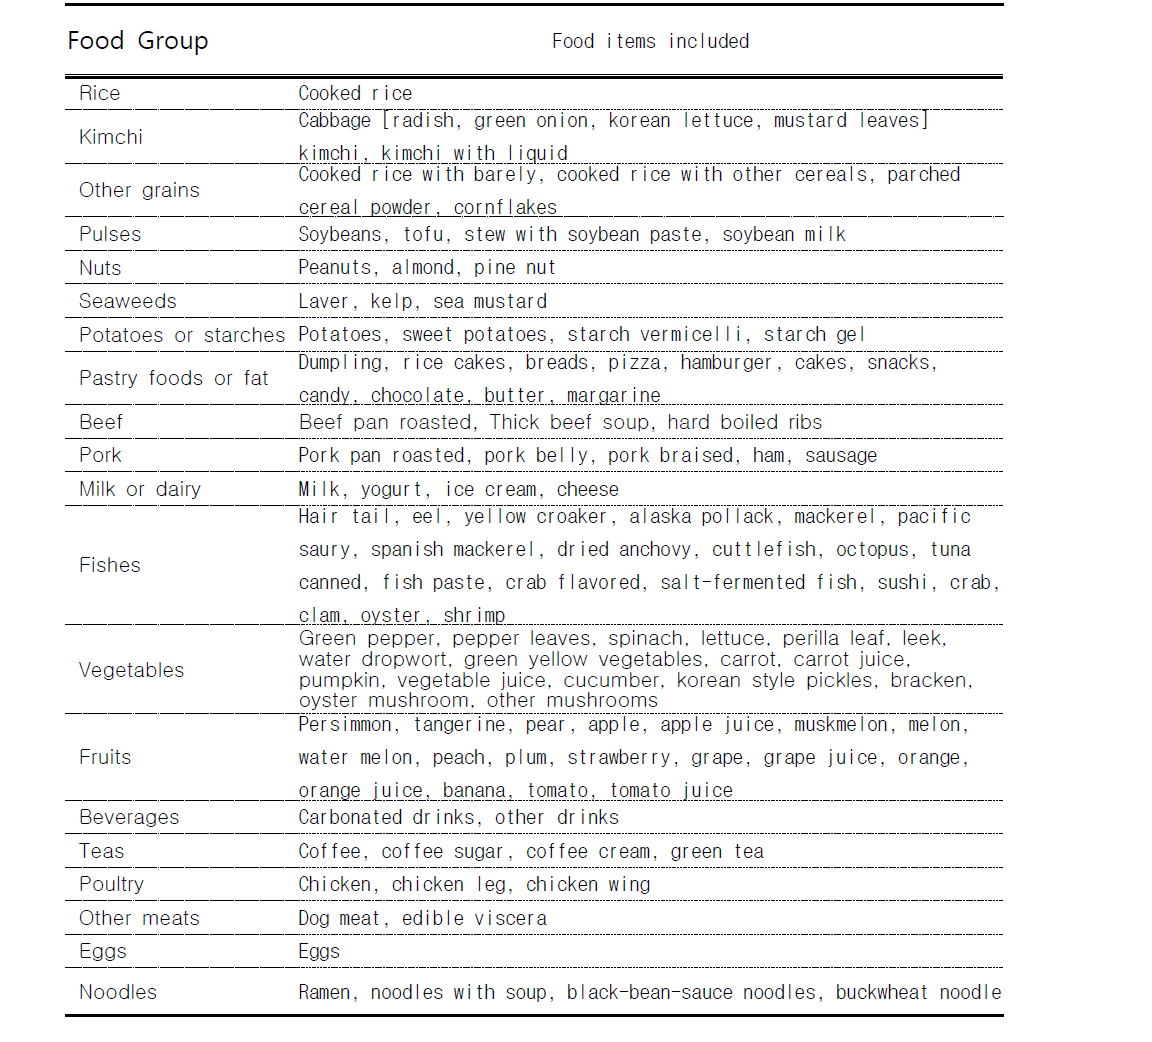 Food grouping used in the dietary pattern analysis